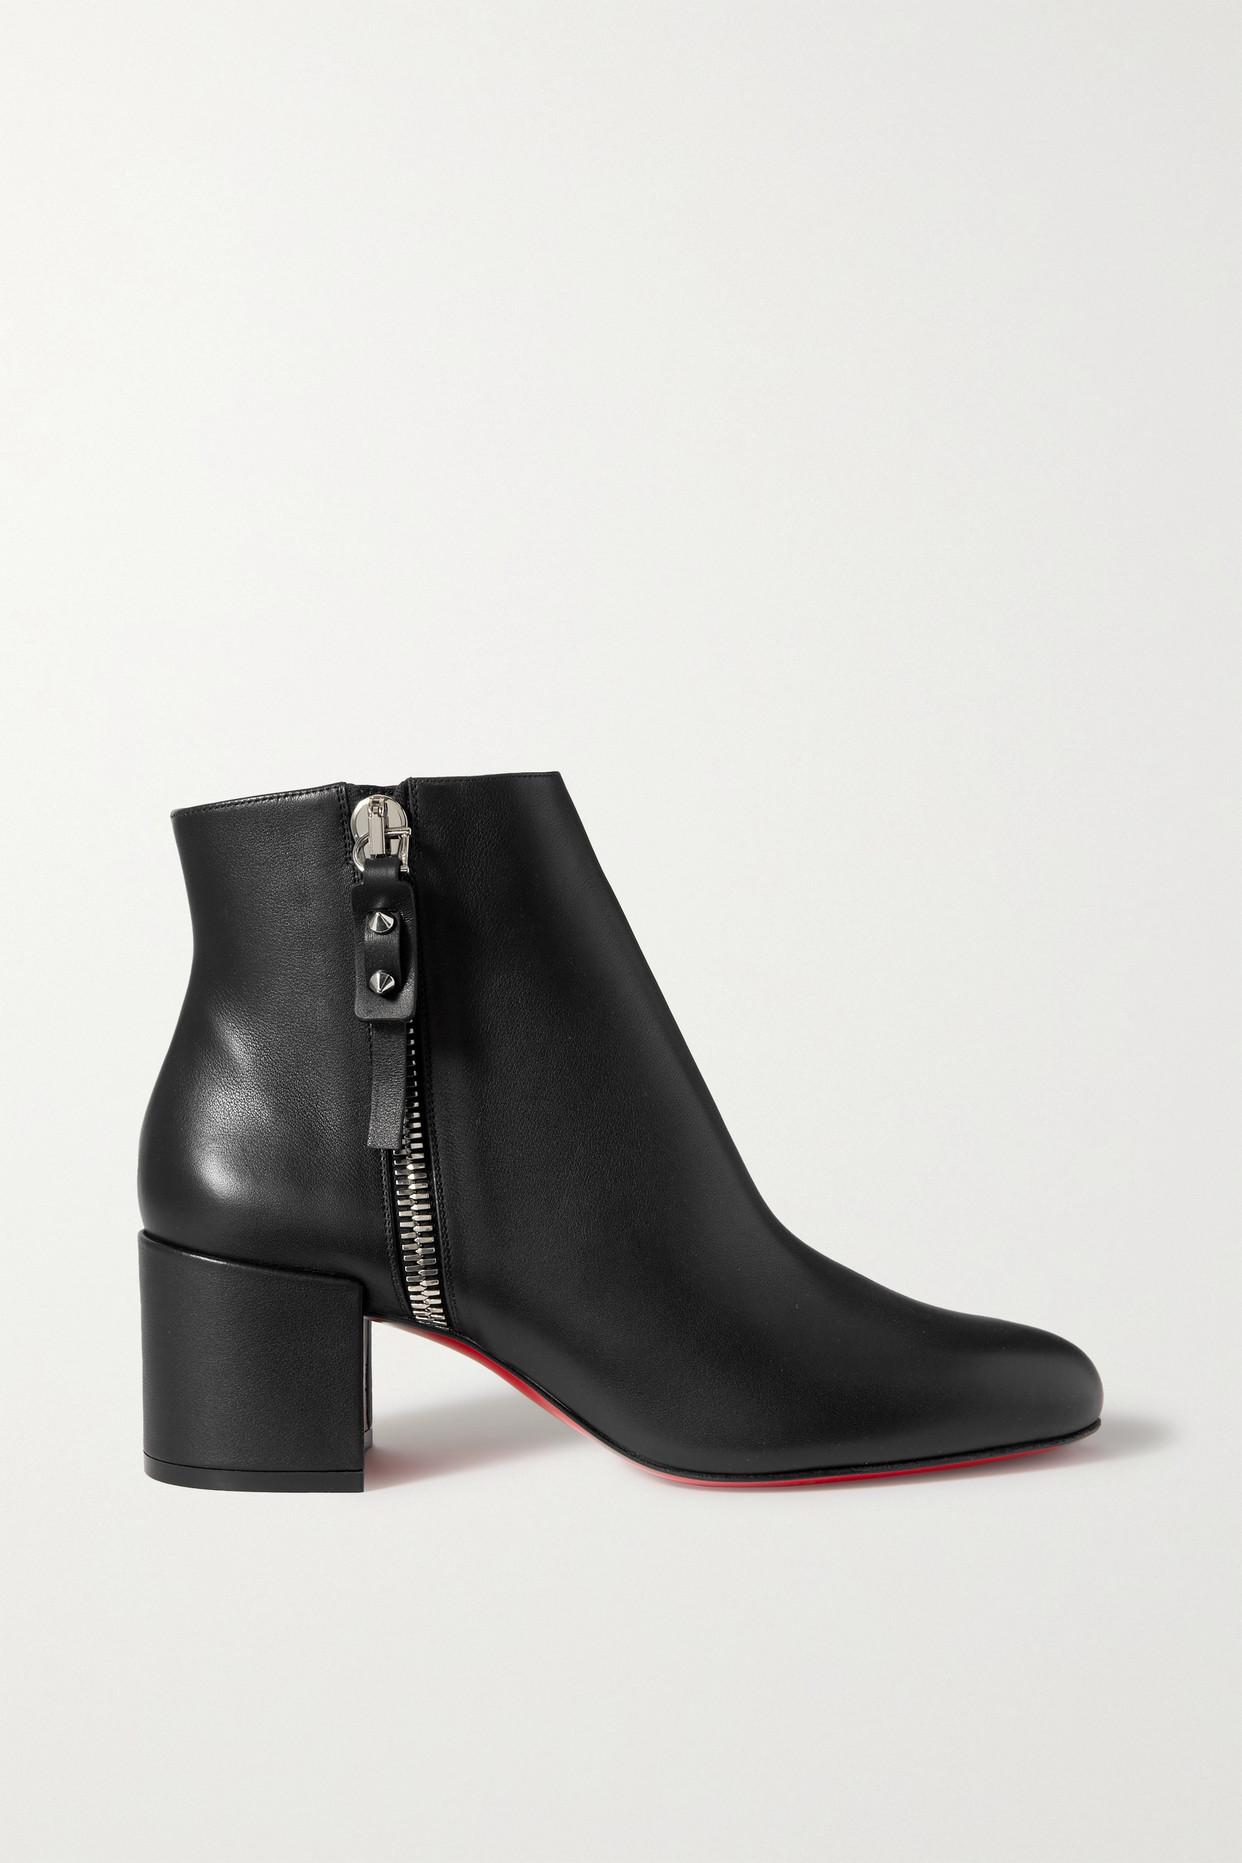 Christian Louboutin Ziptotal 55 Leather Ankle Boots in Black | Lyst